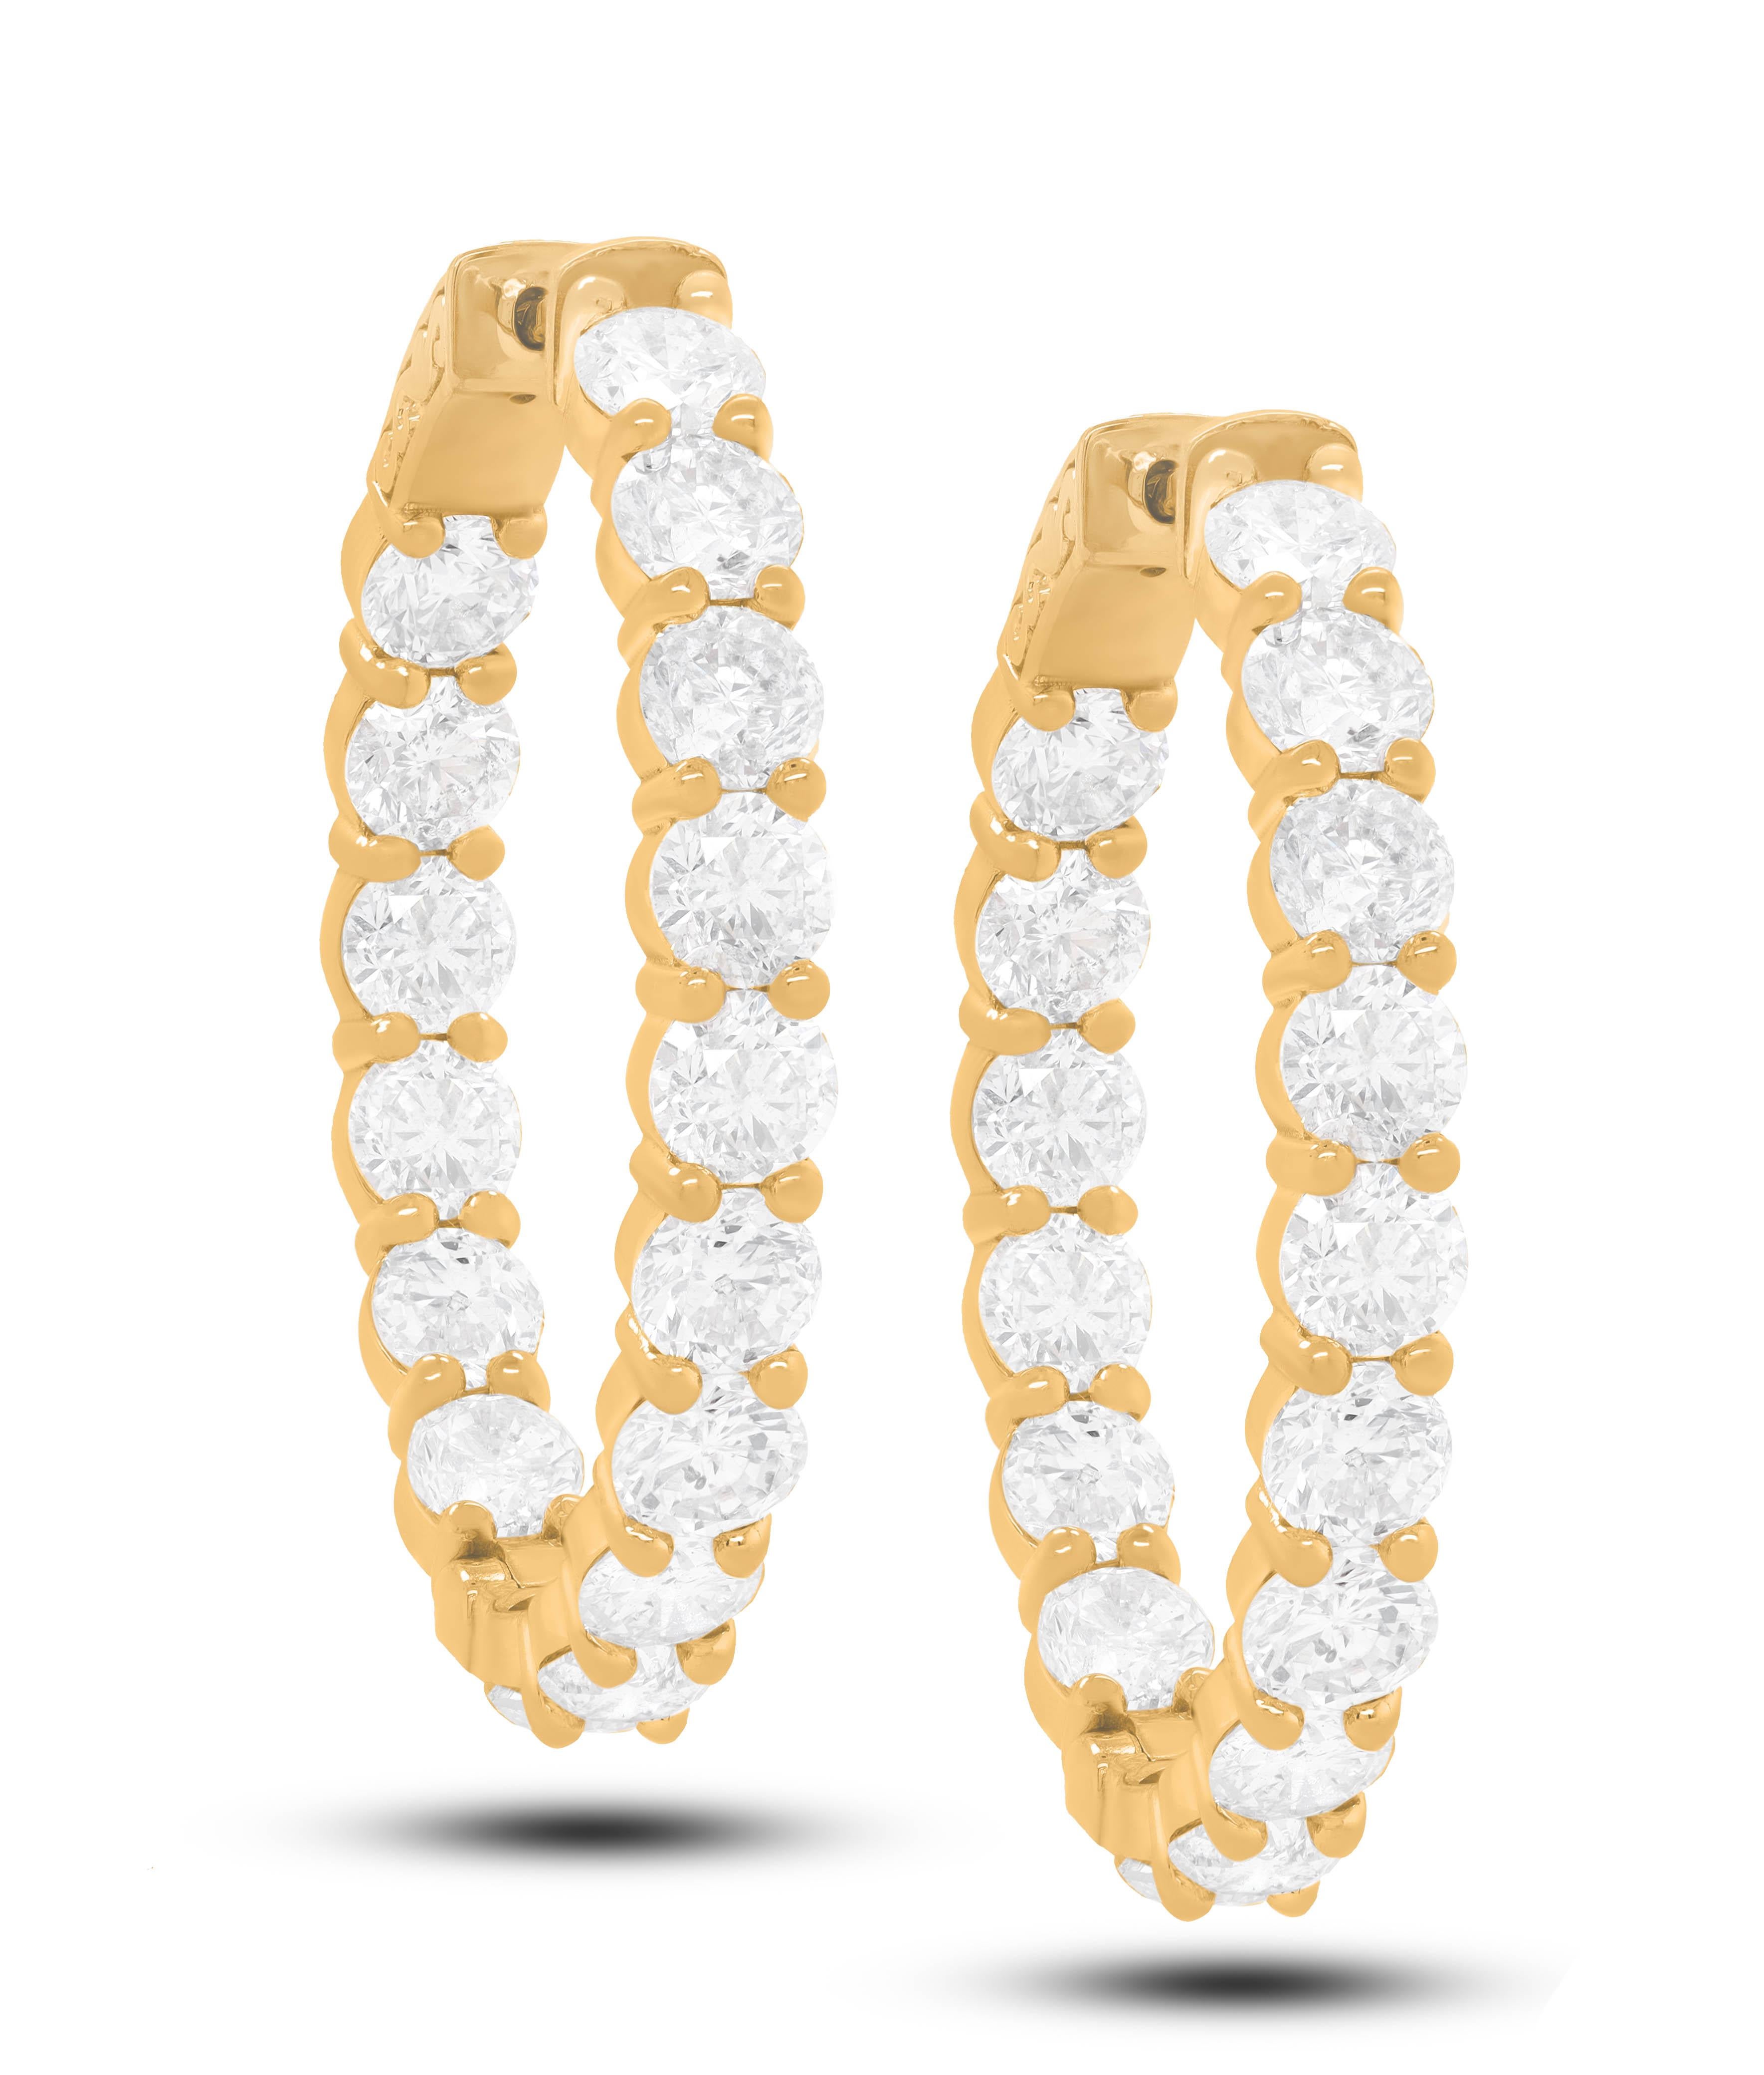 18K Yellow Gold Diamond Earrings featuring 8.55 Carat T.W. of Natural  and White Diamonds

Underline your look with this sharp 18K White and DIAMOND Earrings. High quality Diamonds. This Earrings will underline your exquisite look for any